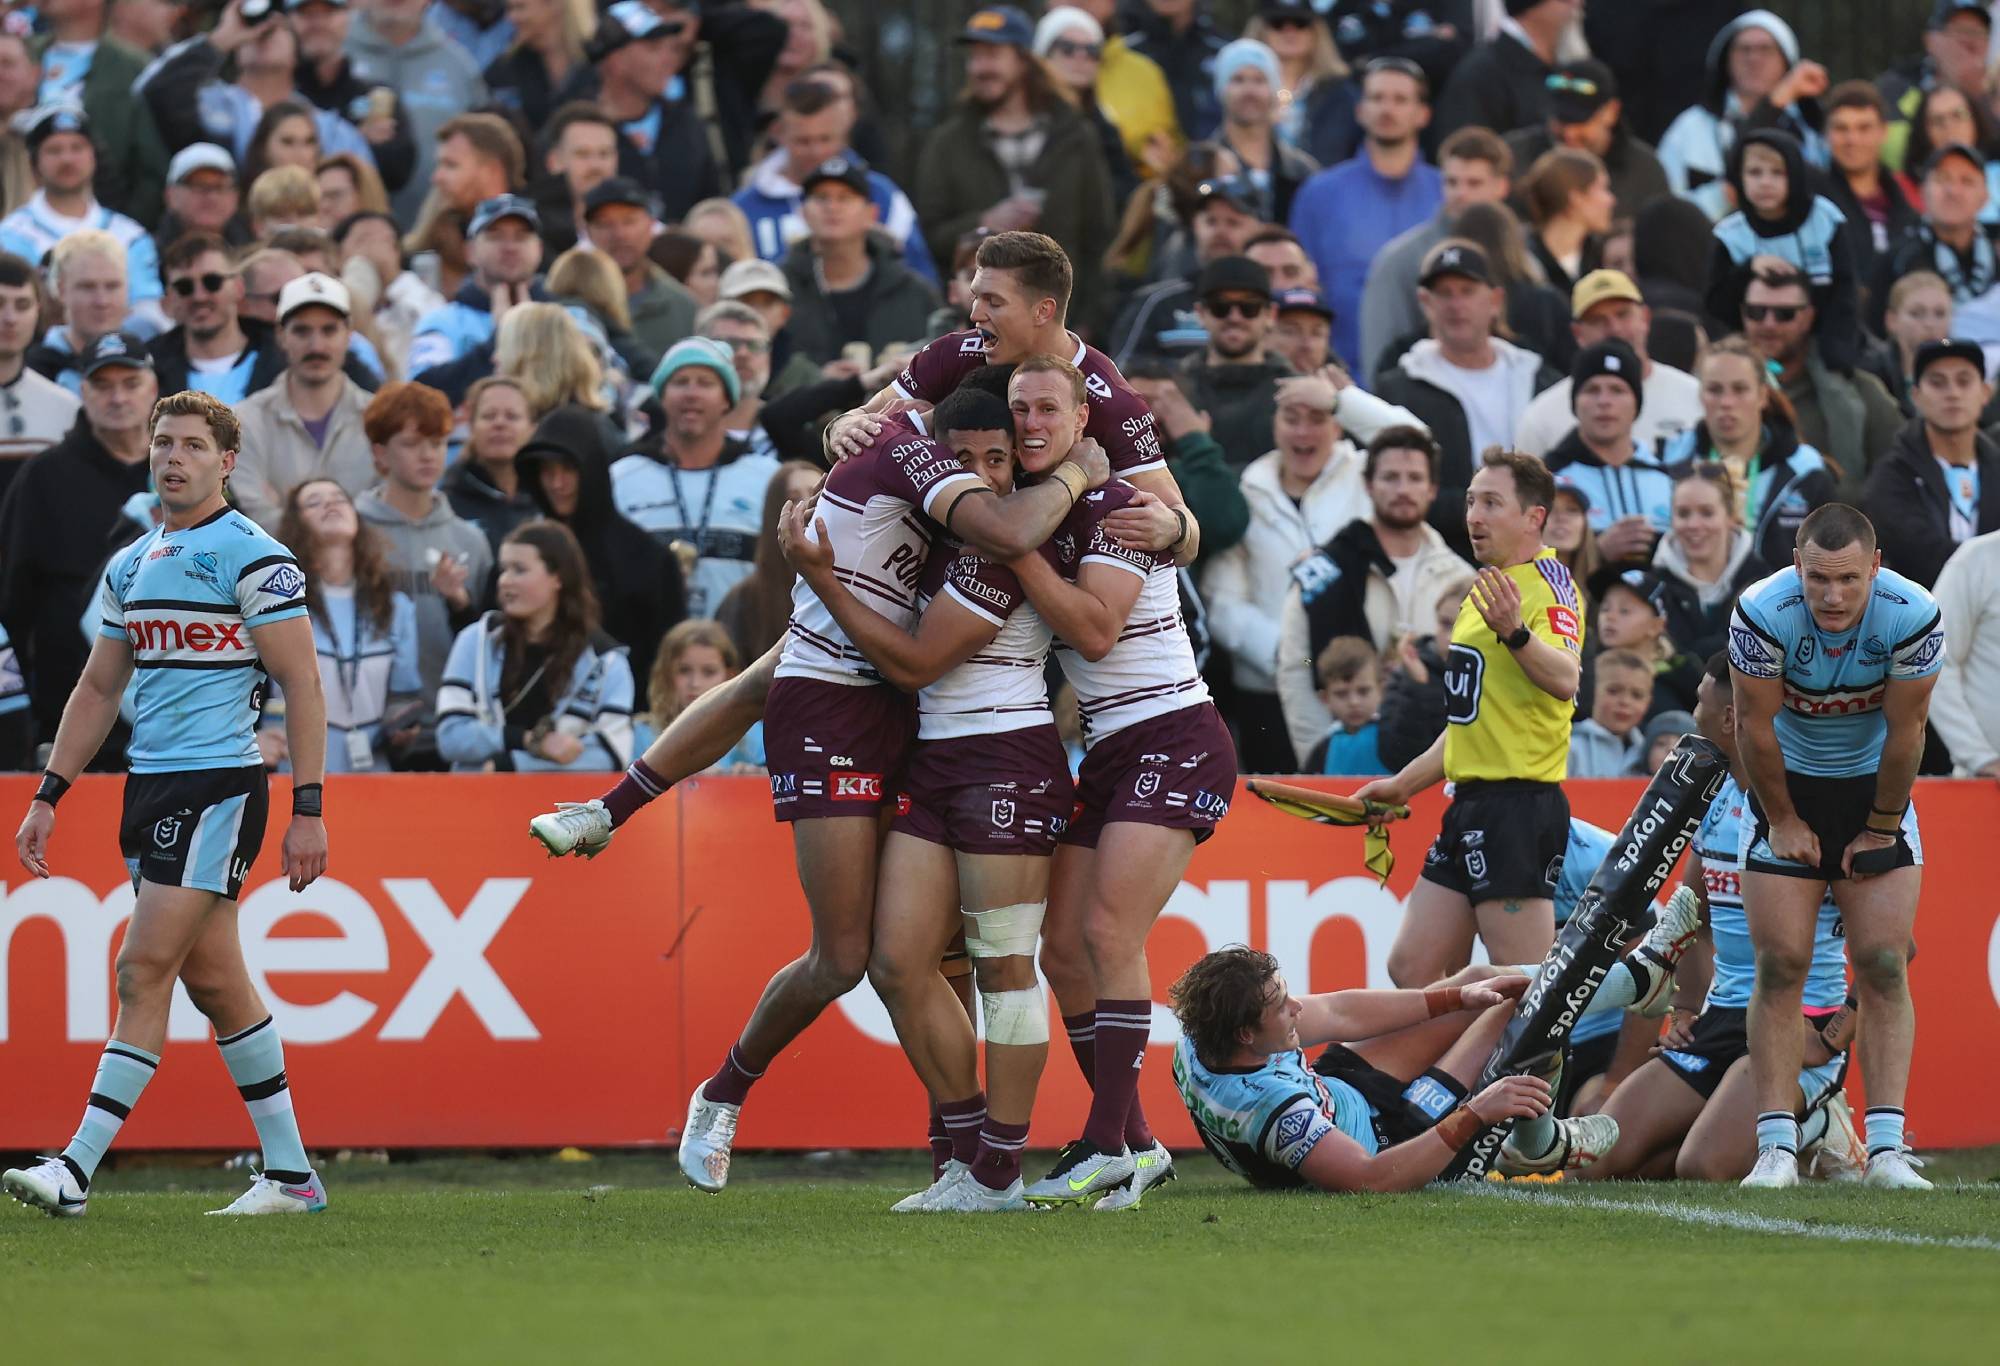 SYDNEY, AUSTRALIA - JULY 23: The Manly Sea celebrate after scoring a try during the round 21 NRL match between Cronulla Sharks and Manly Sea Eagles at PointsBet Stadium on July 23, 2023 in Sydney, Australia. (Photo by Tim Allsop/Getty Images)